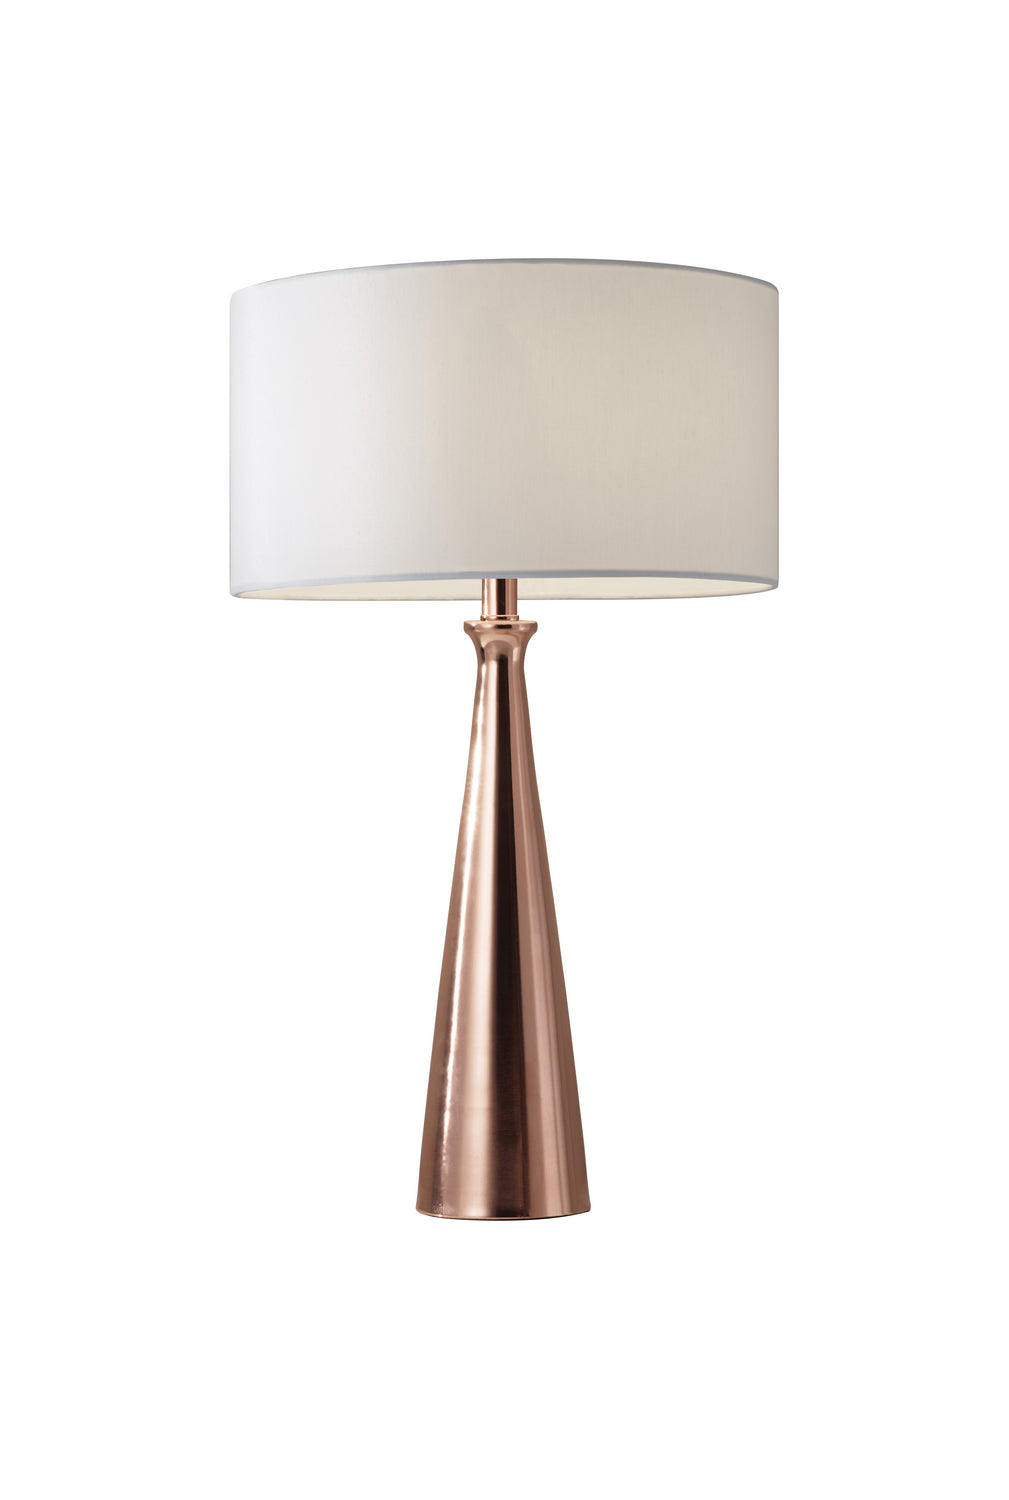 Adesso Home 1517-20  Linda Lamp Brushed Copper